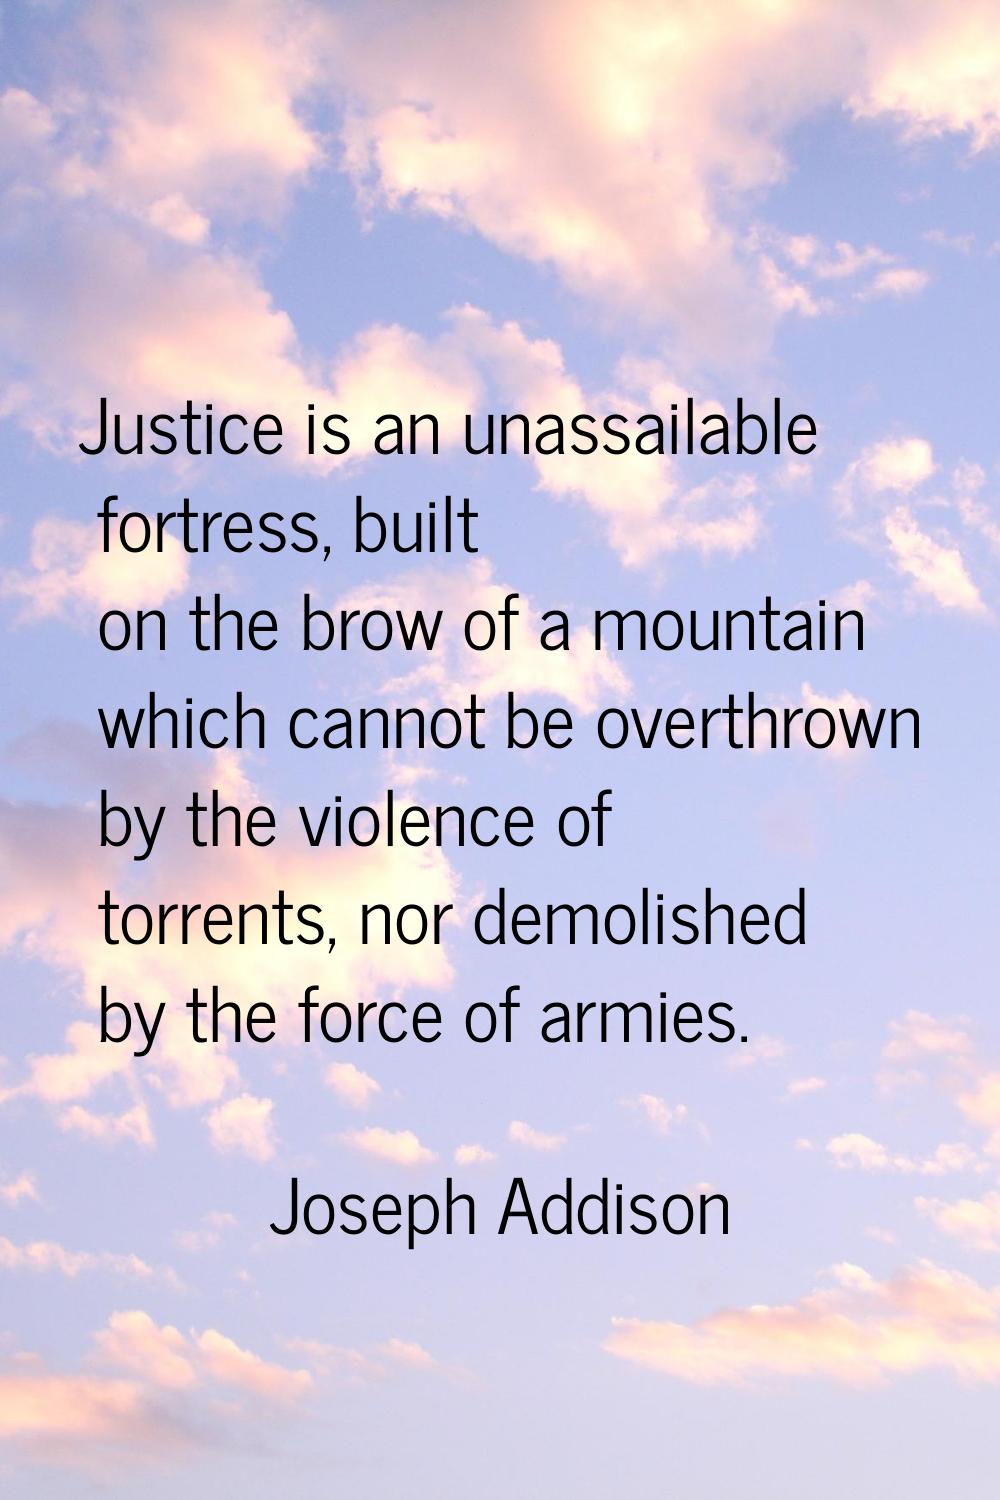 Justice is an unassailable fortress, built on the brow of a mountain which cannot be overthrown by 